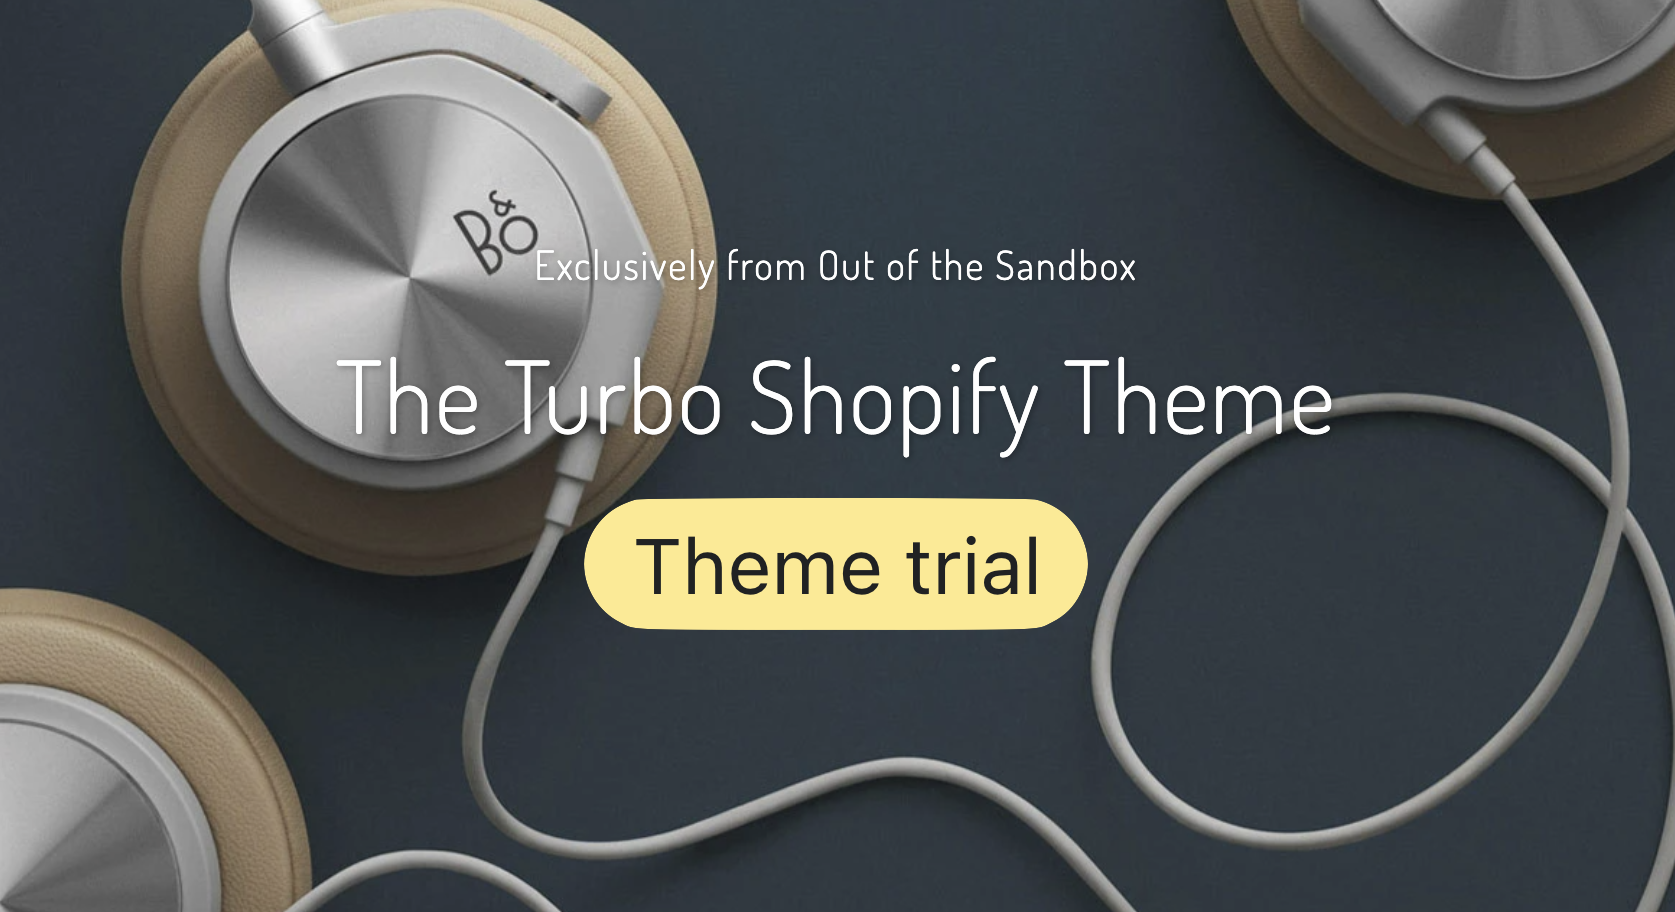 theme_trial_available_for_the_turbo_shopify_theme.png